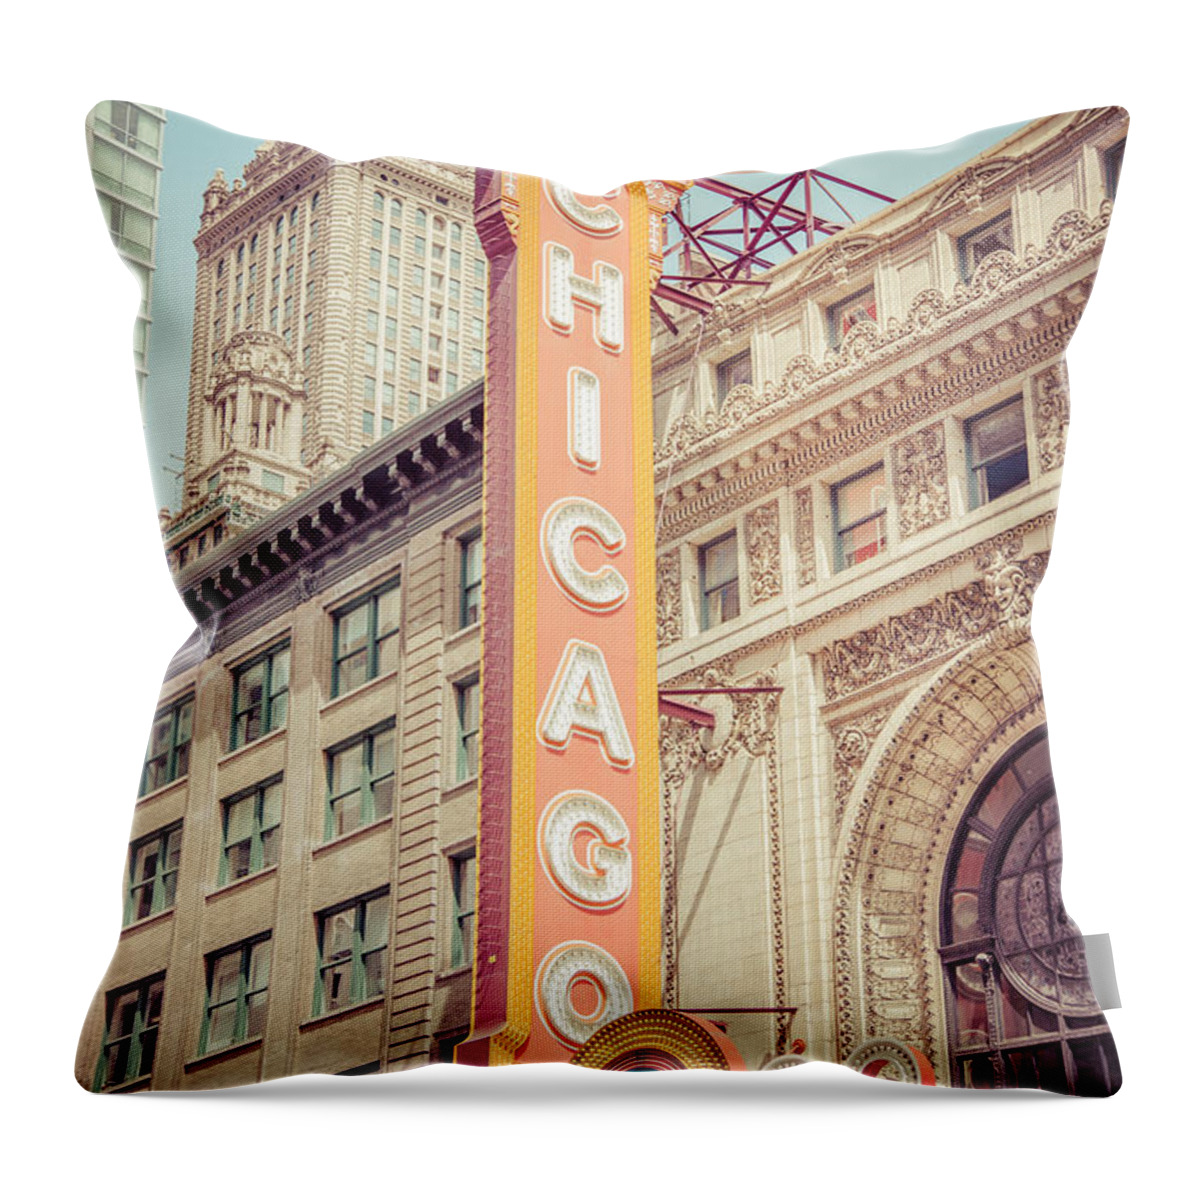 America Throw Pillow featuring the photograph Chicago Theatre Retro Vintage Picture by Paul Velgos